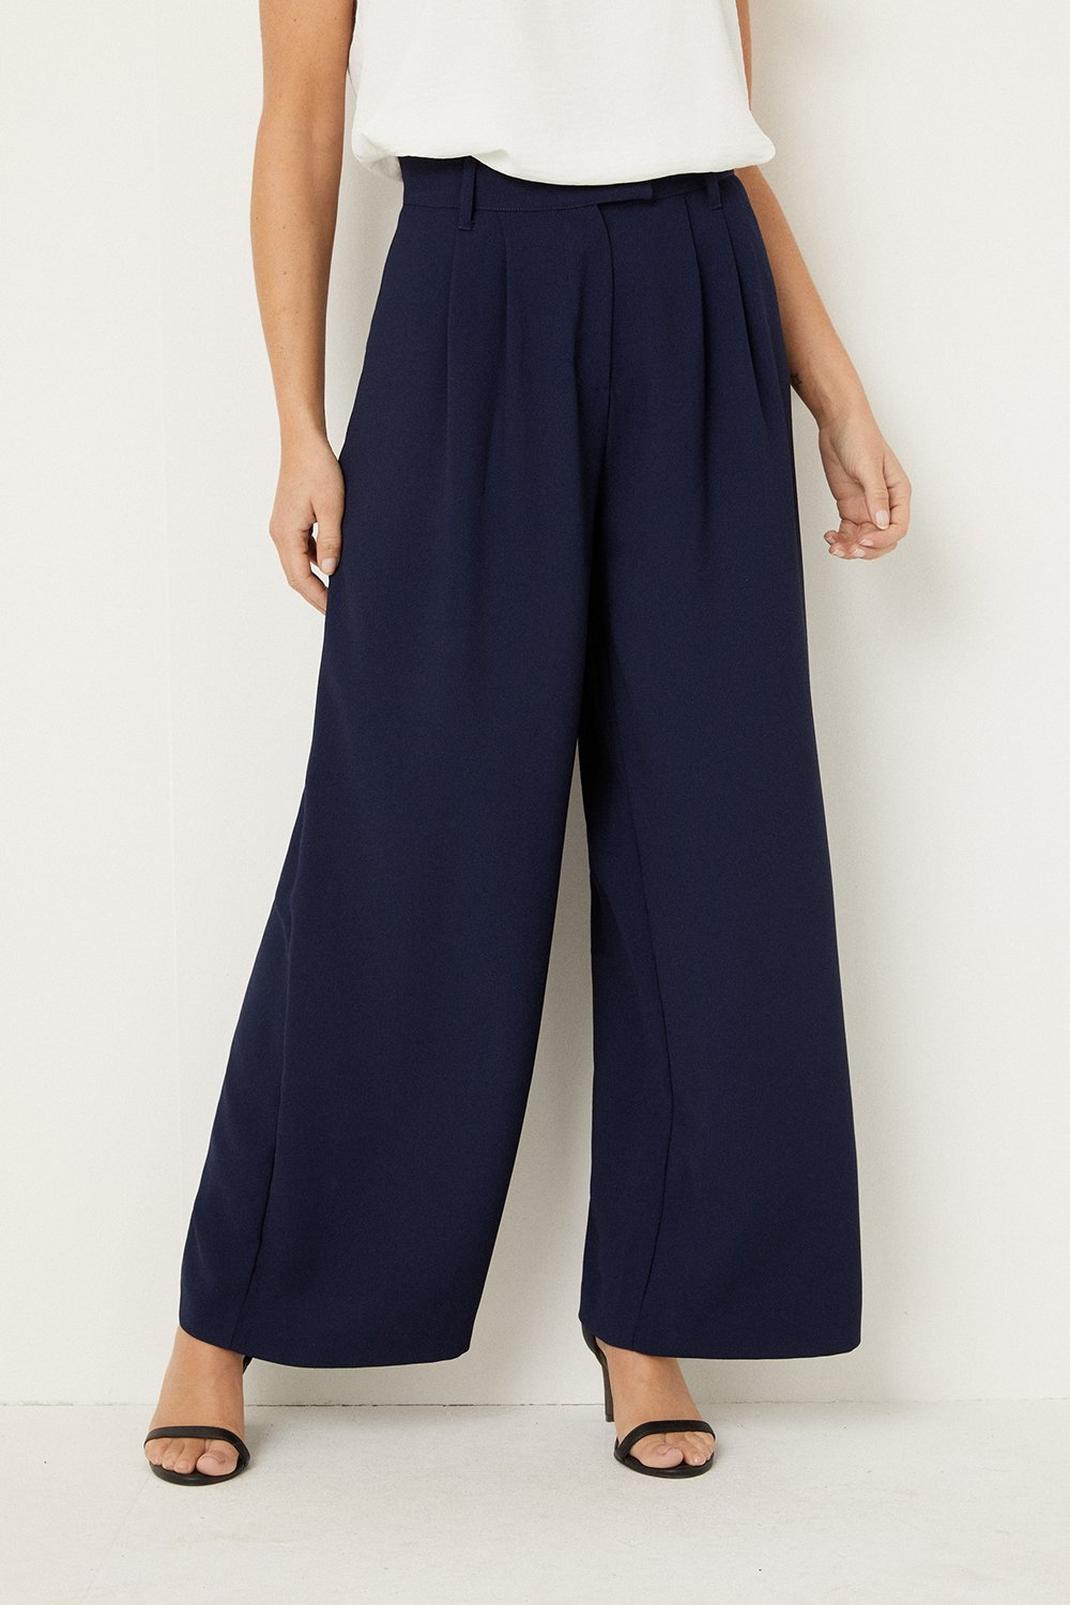 Petite Navy Wide Leg Trousers image number 1